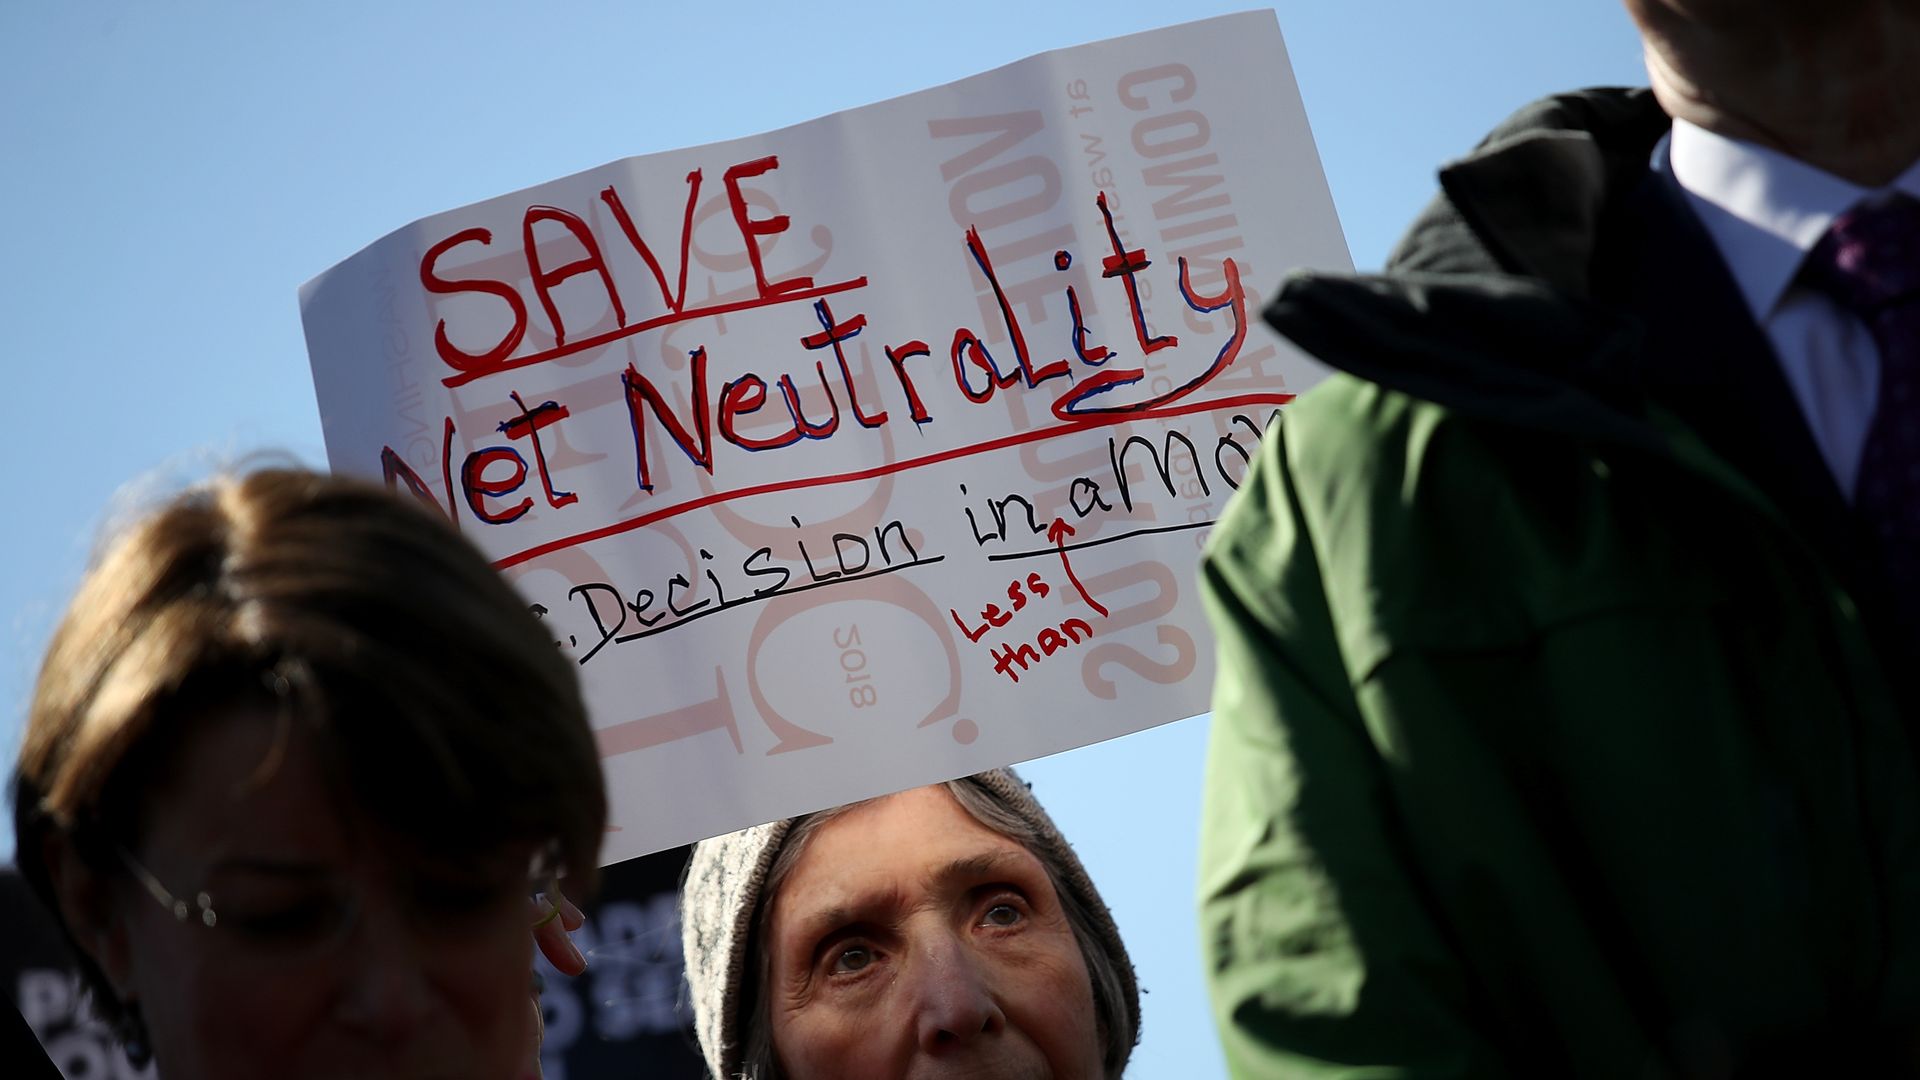 A woman holds a sign that says "Save net neutrality"